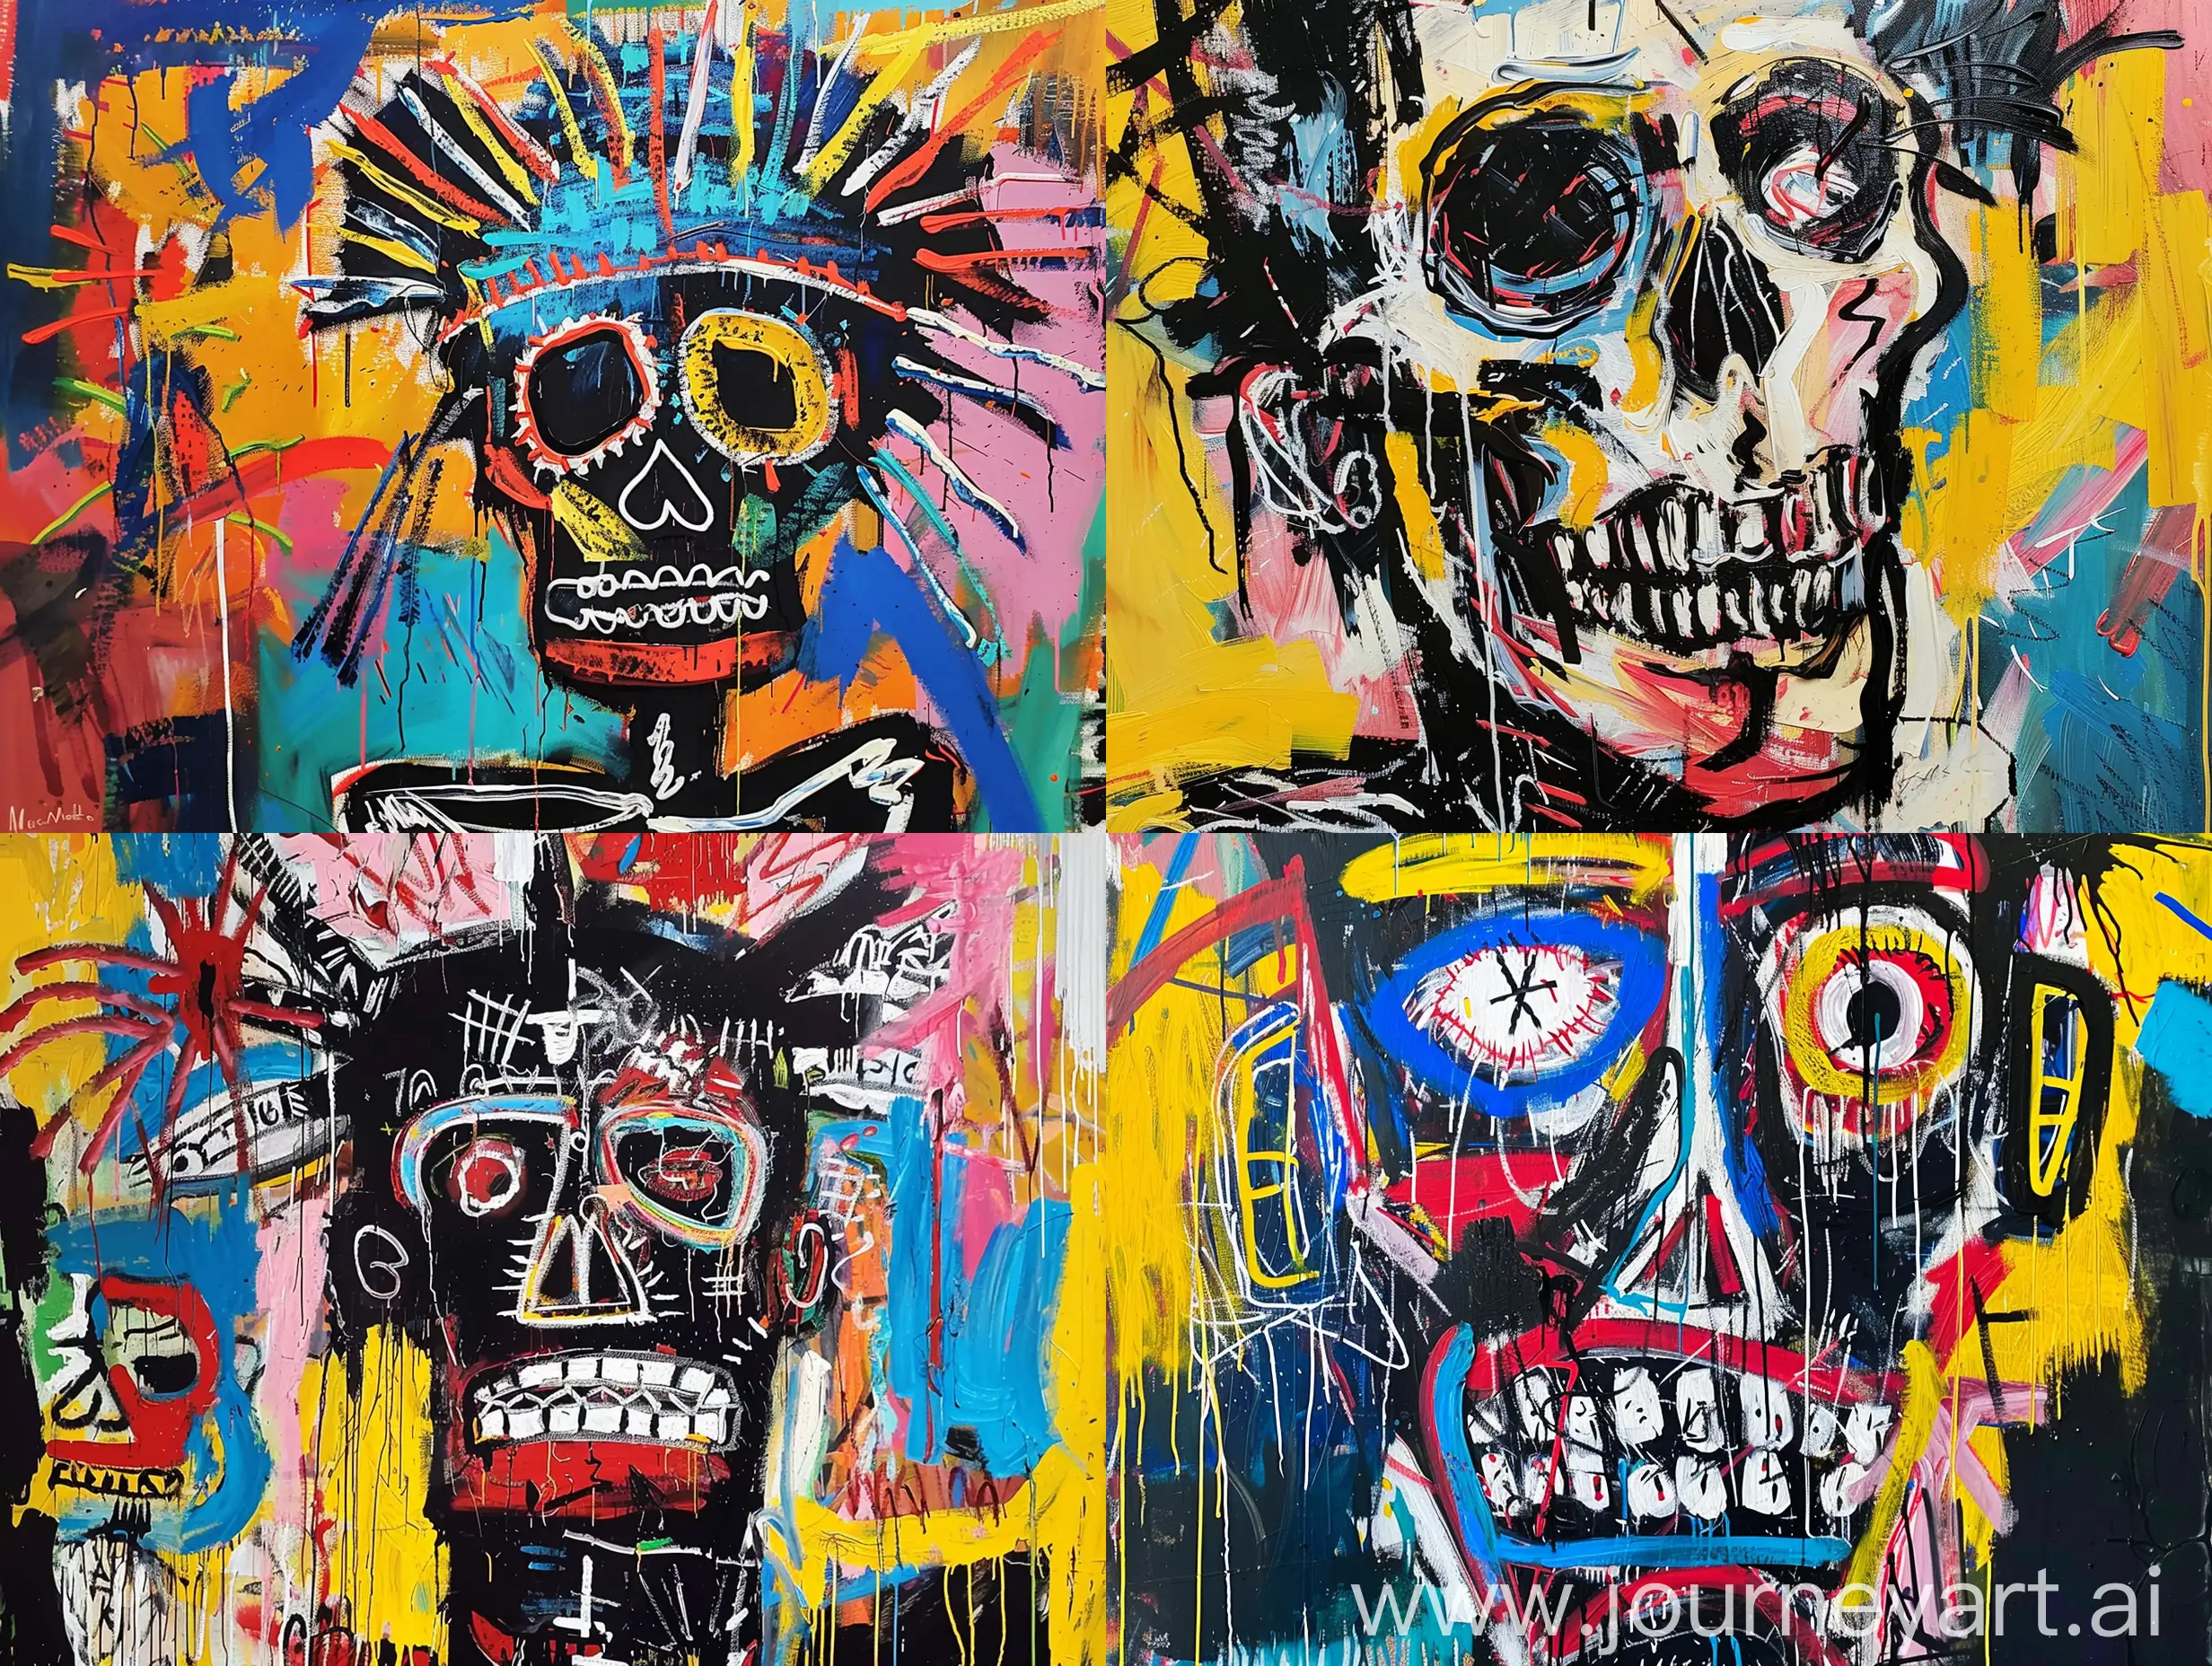 A beautiful magnificent immaculate award winning professional realistic voodoo painting in the style of jean michel basquiat